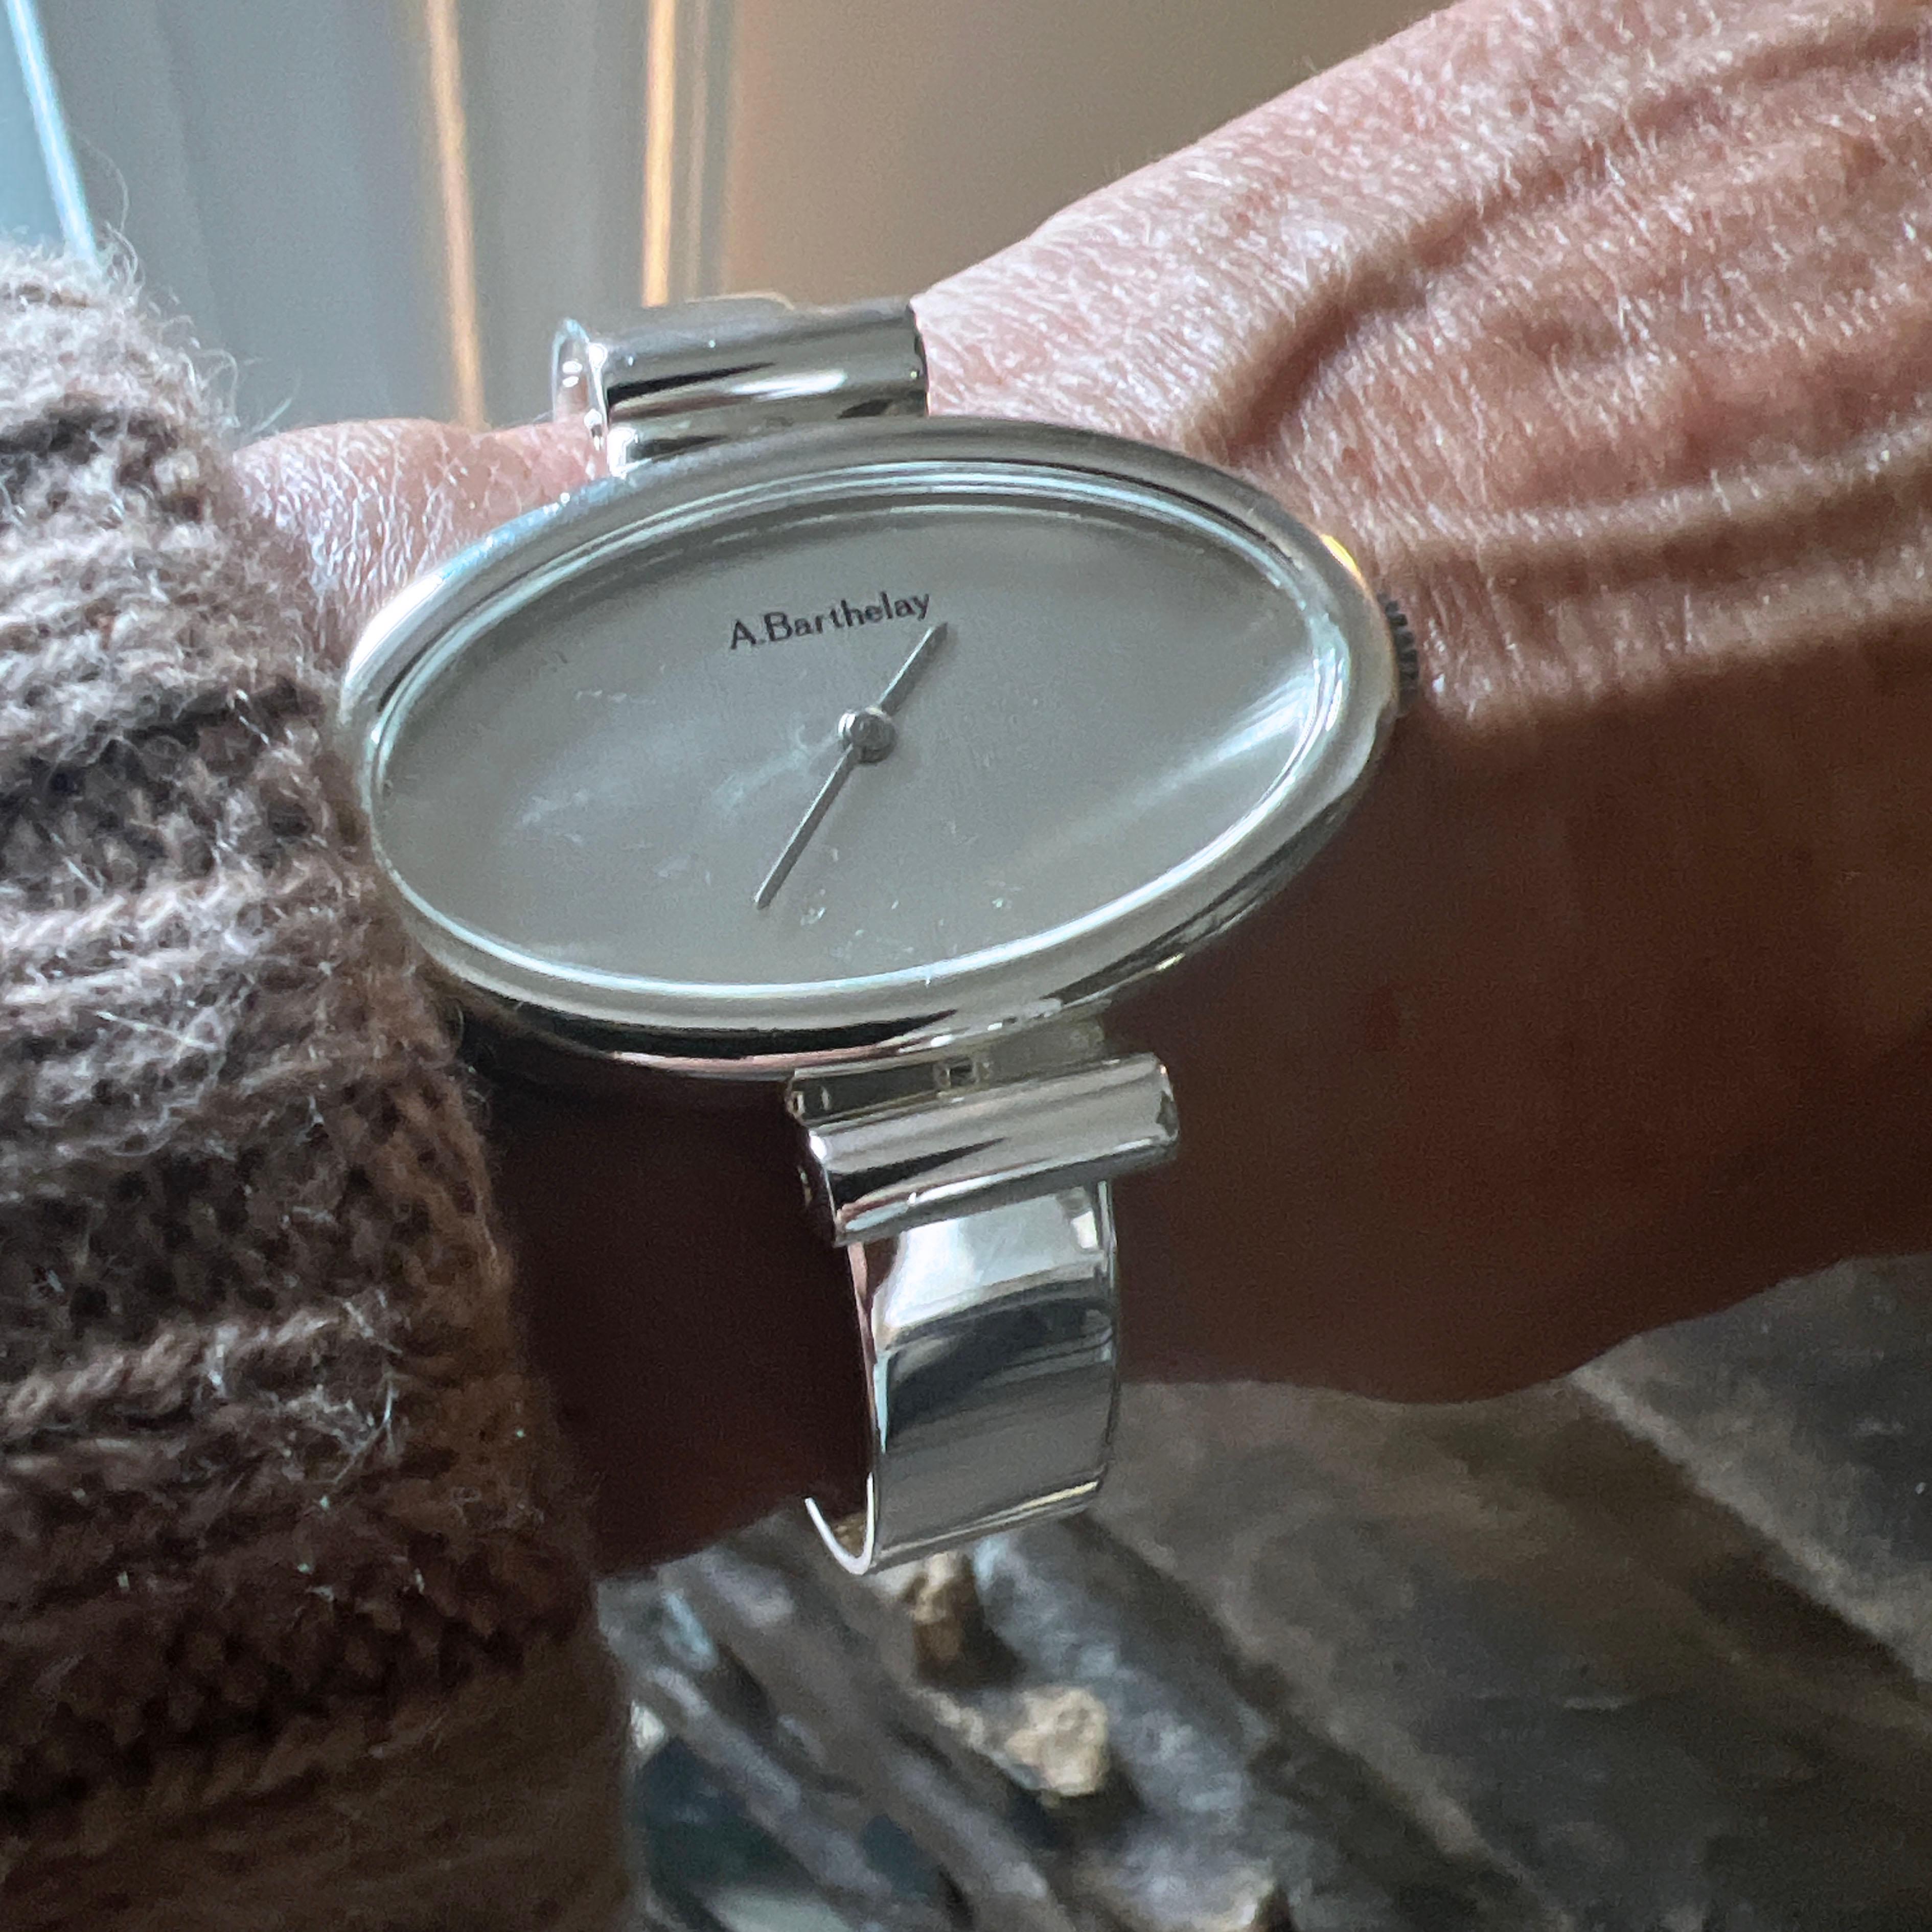 1972 Alexis Barthelay Hand-Wound Movement Elliptical Sterling Silver Watch For Sale 4